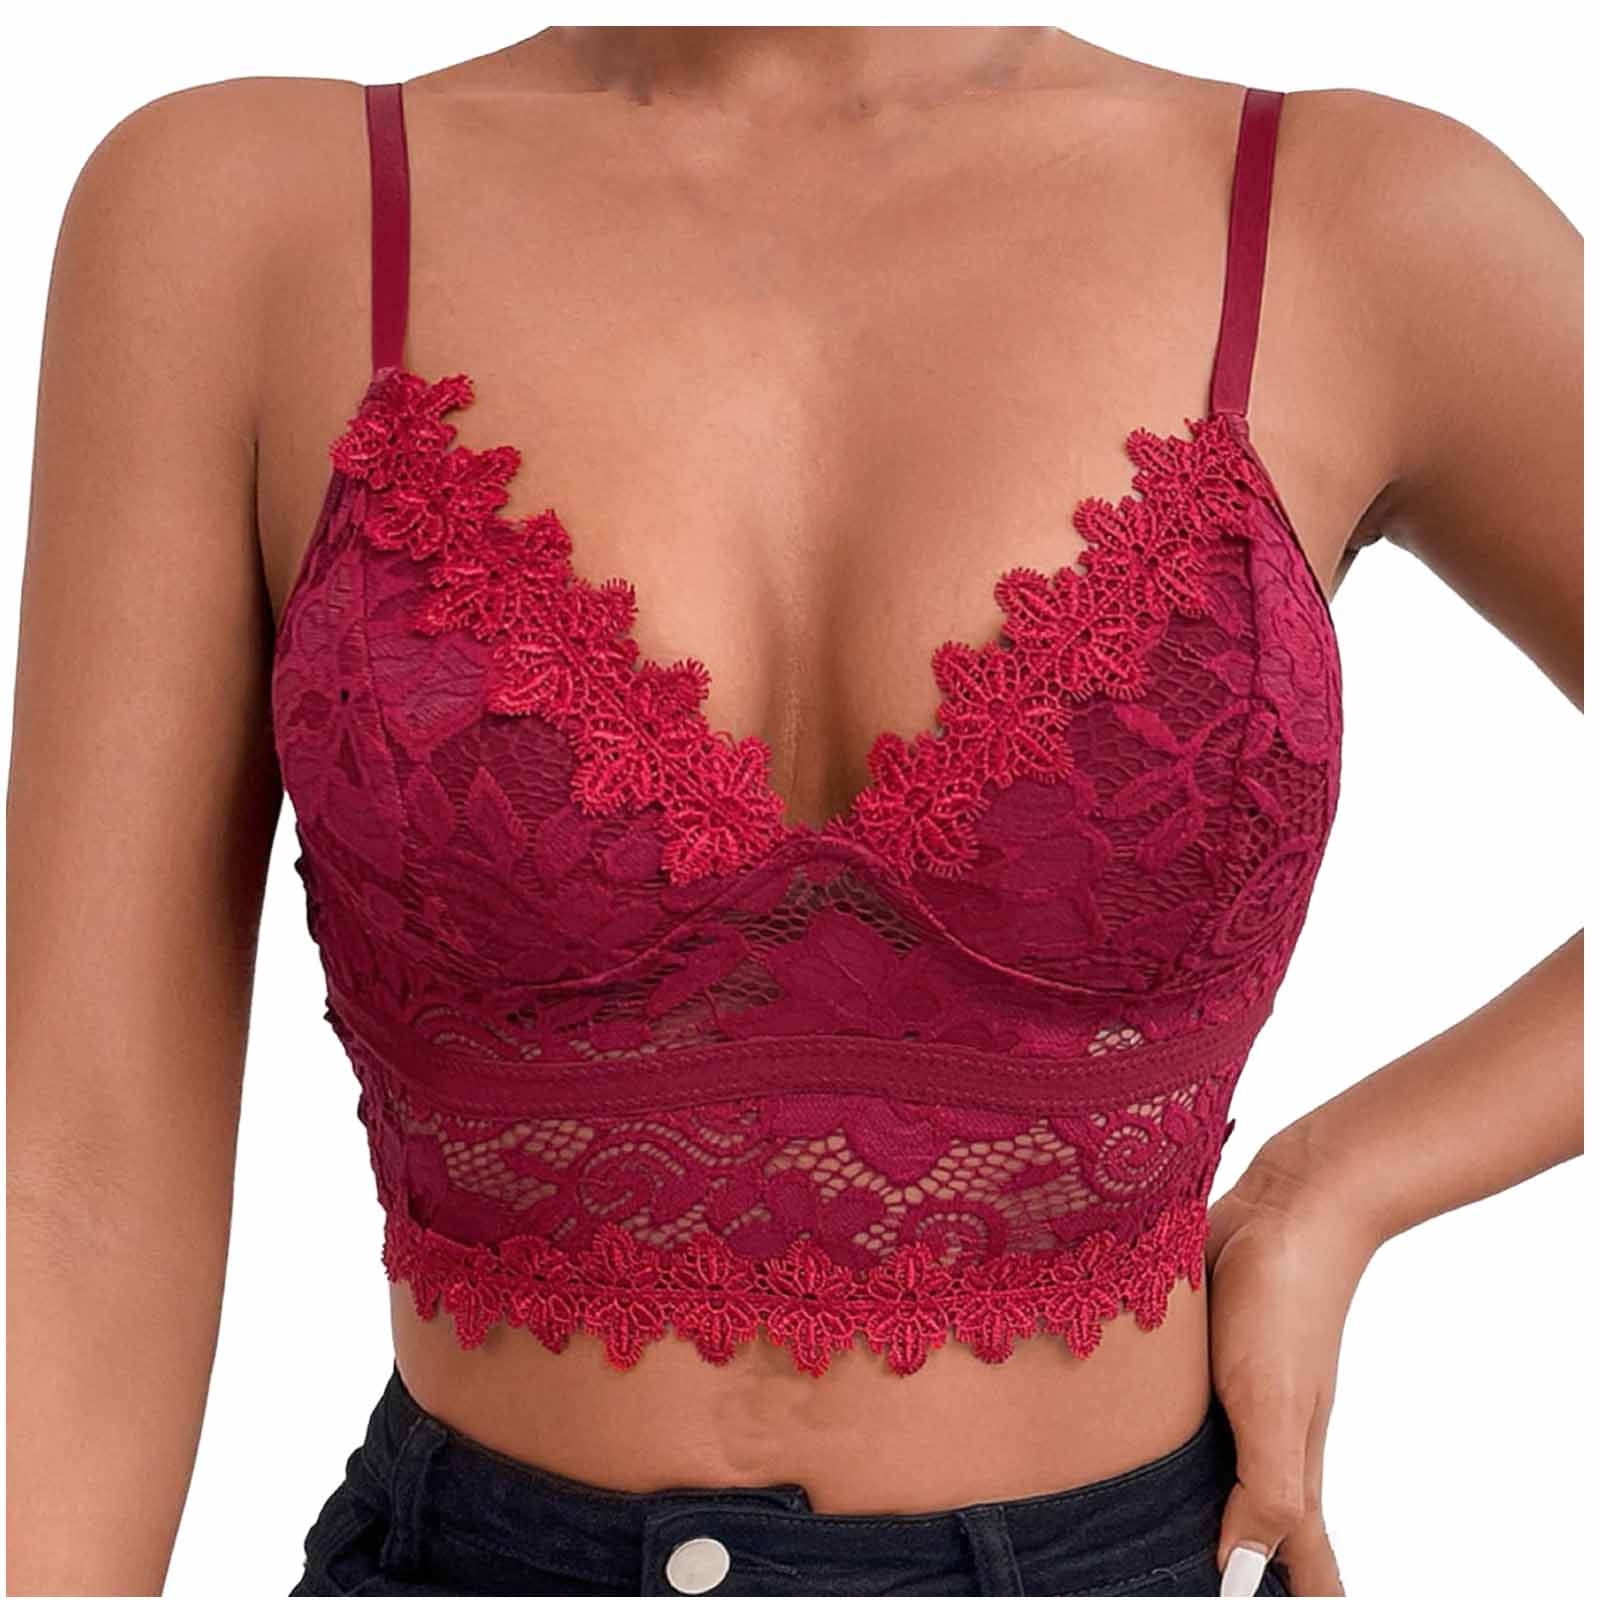 Solid Lace Cami Top  Lace top outfits, Lace cami top outfit, Lace bra  outfit